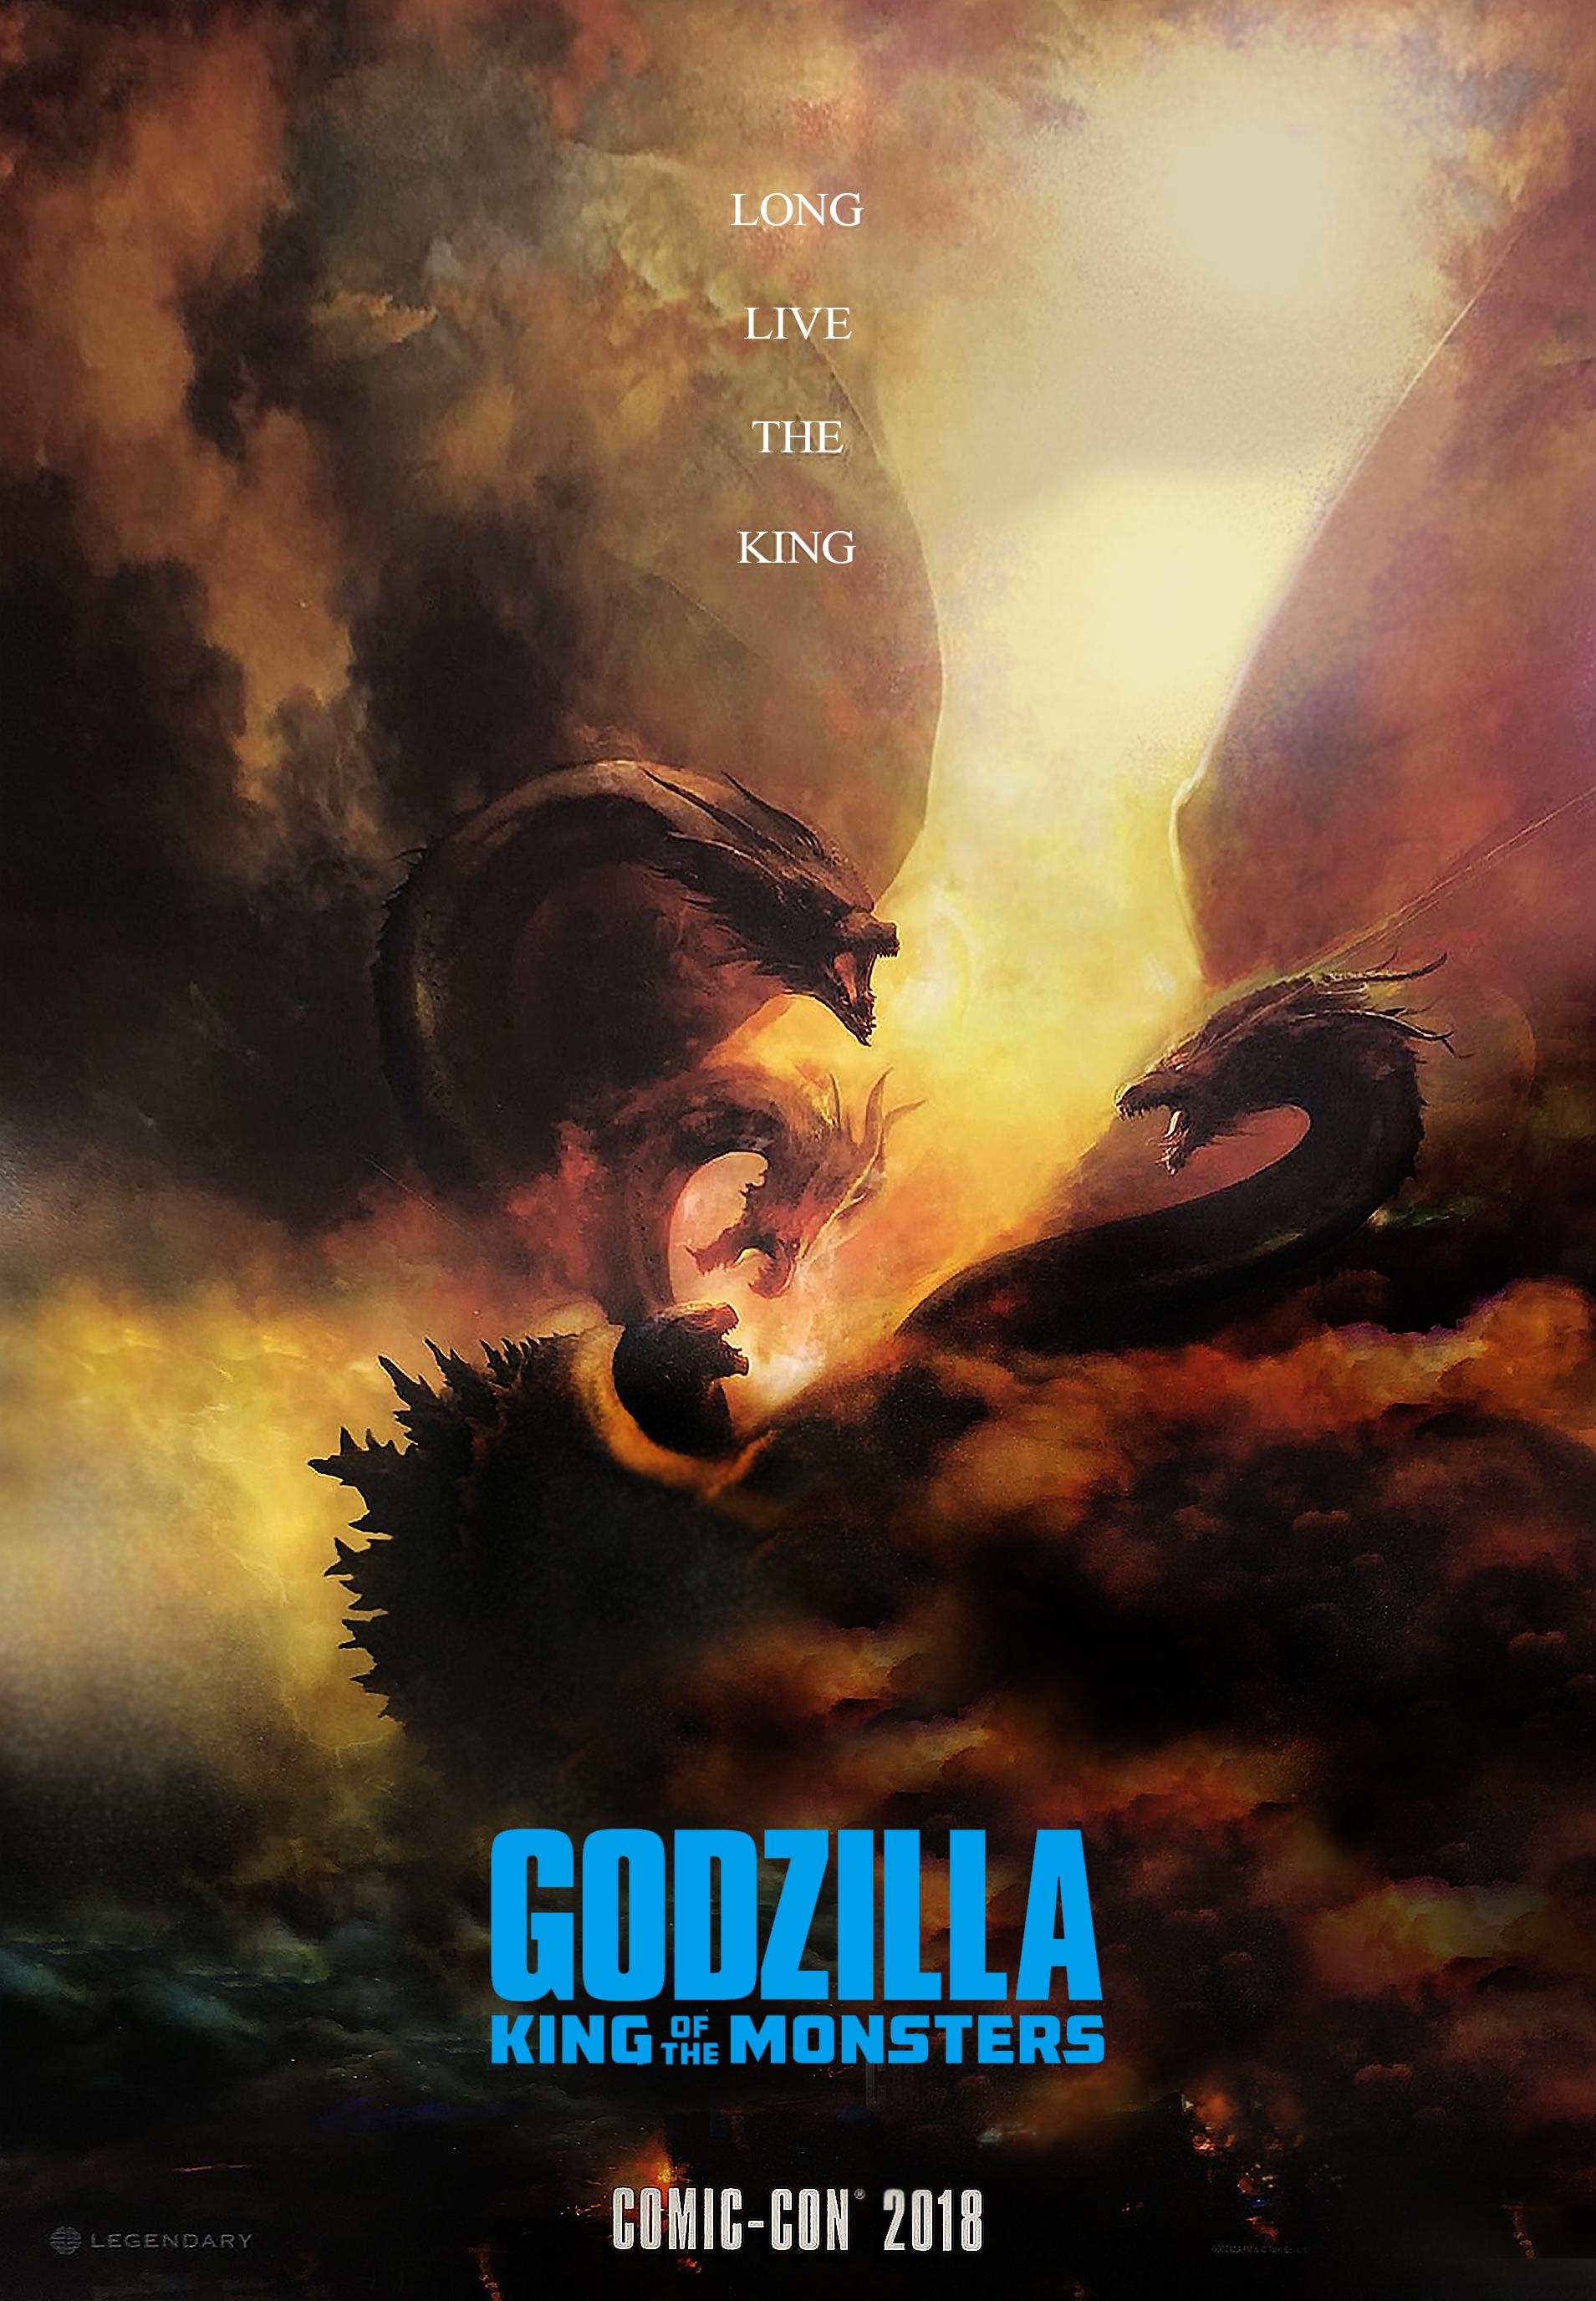 godzilla king monsters sdccposter Godzilla: King of the Monsters Teaser and Concept Art Reveals Kaiju